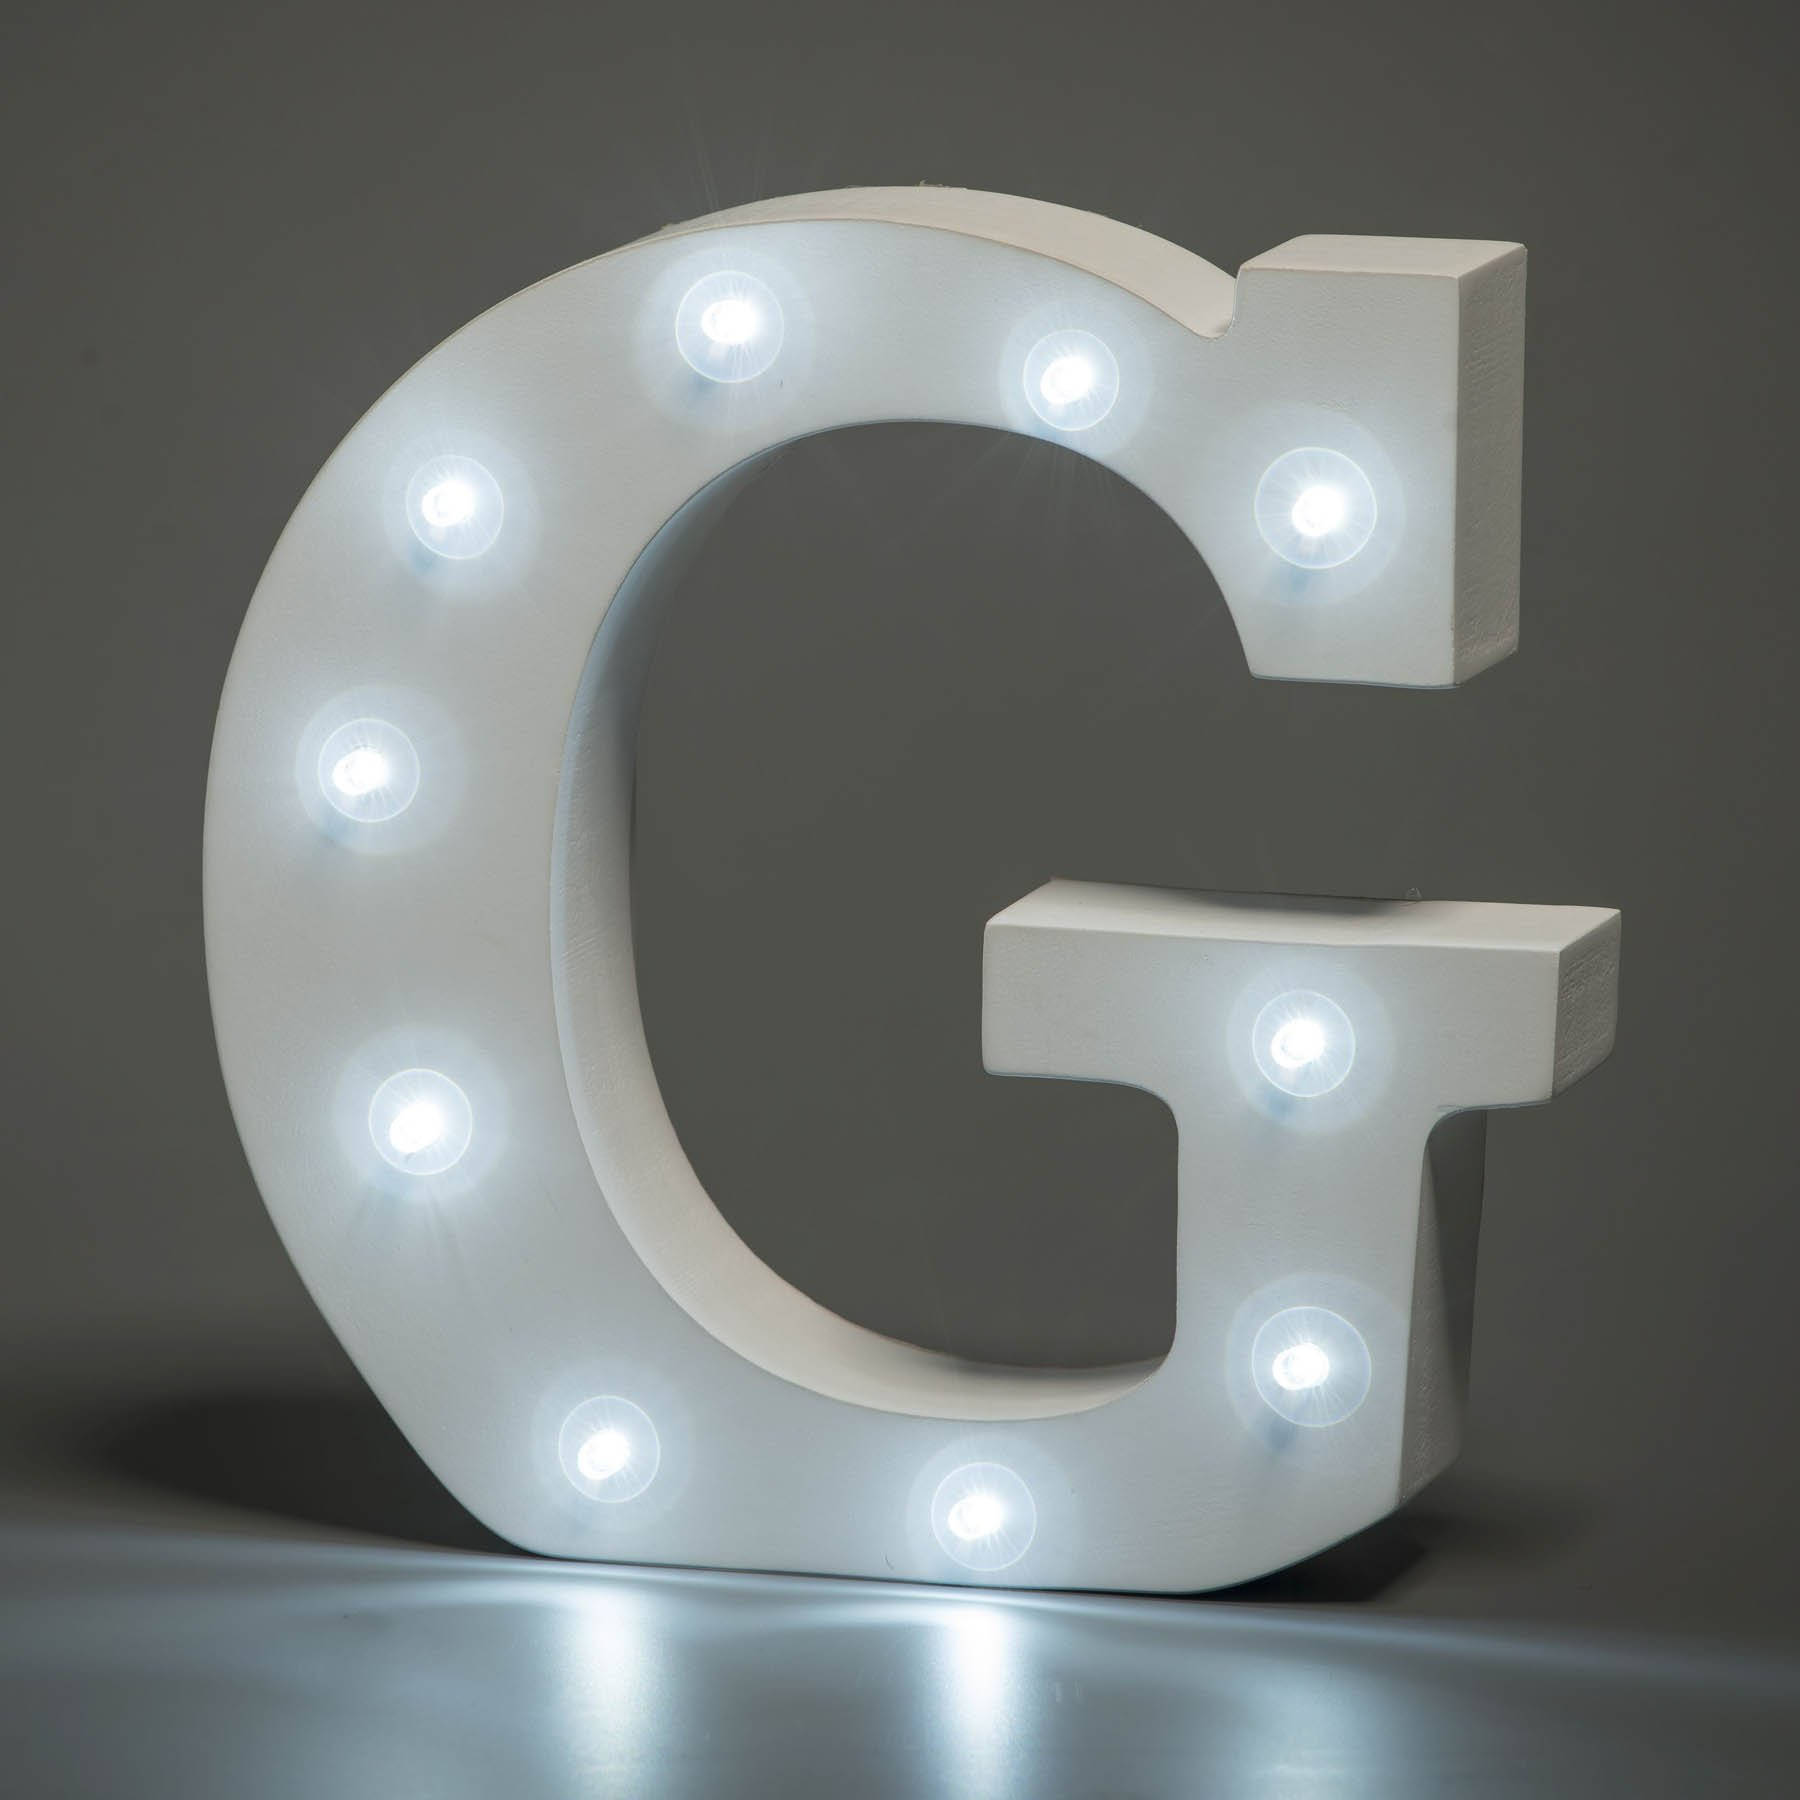 3d Letter G With Lights Background